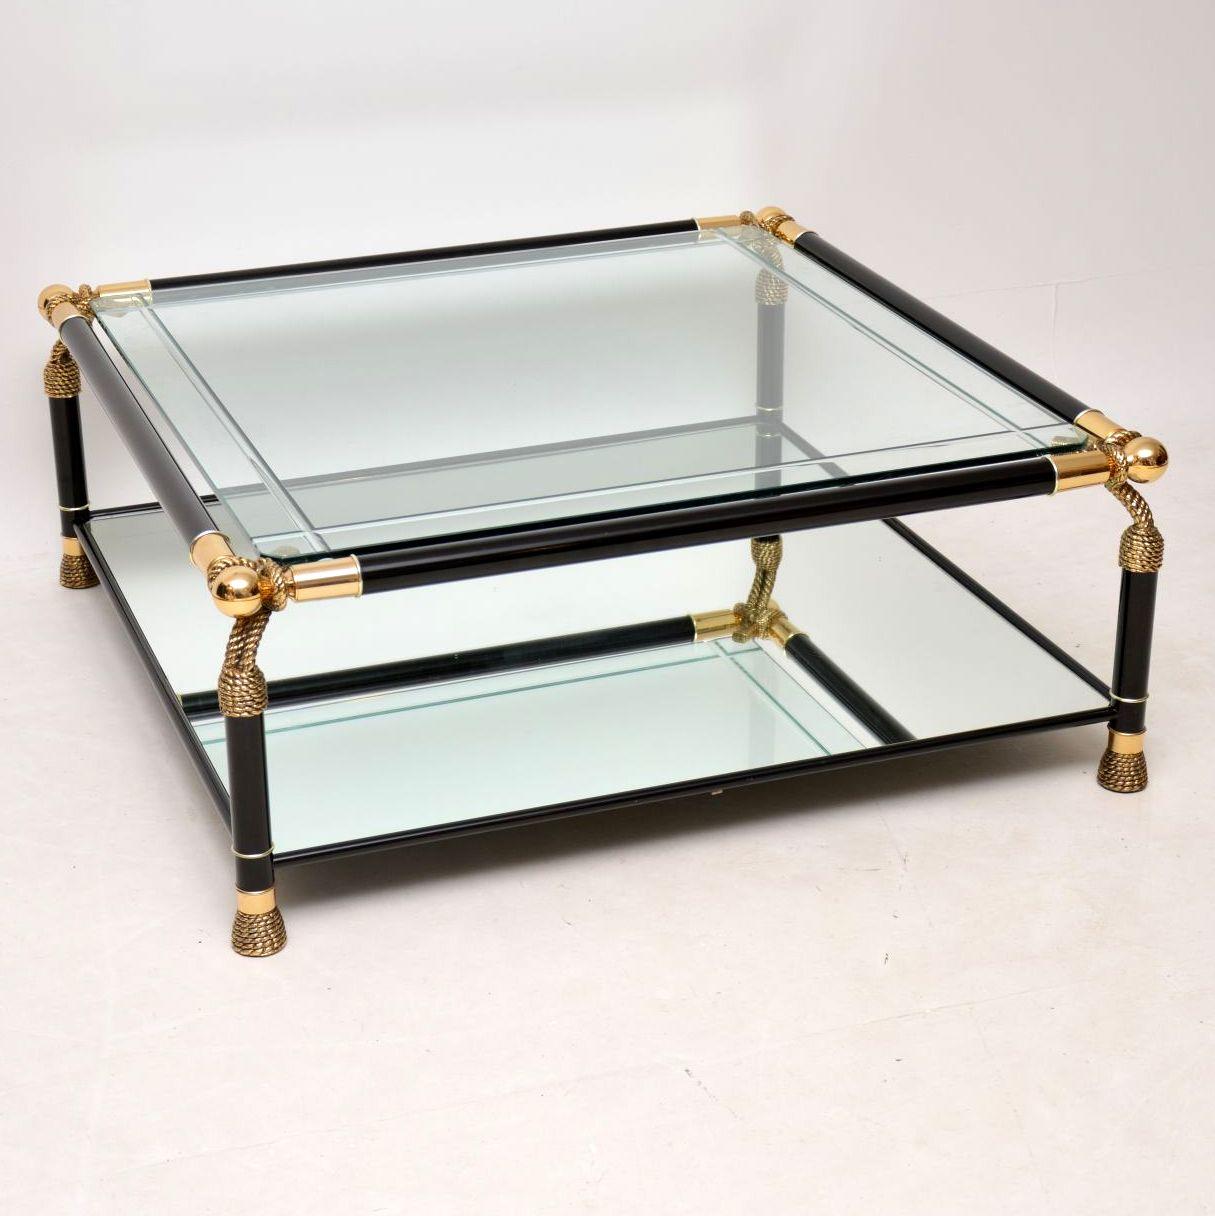 A large and absolutely stunning, extremely well made vintage coffee table, this was made in Italy in the 1970s. It has a black aluminum frame with brass supports, a mirrored base and a thick, engraved, beveled edge glass top. This is in great